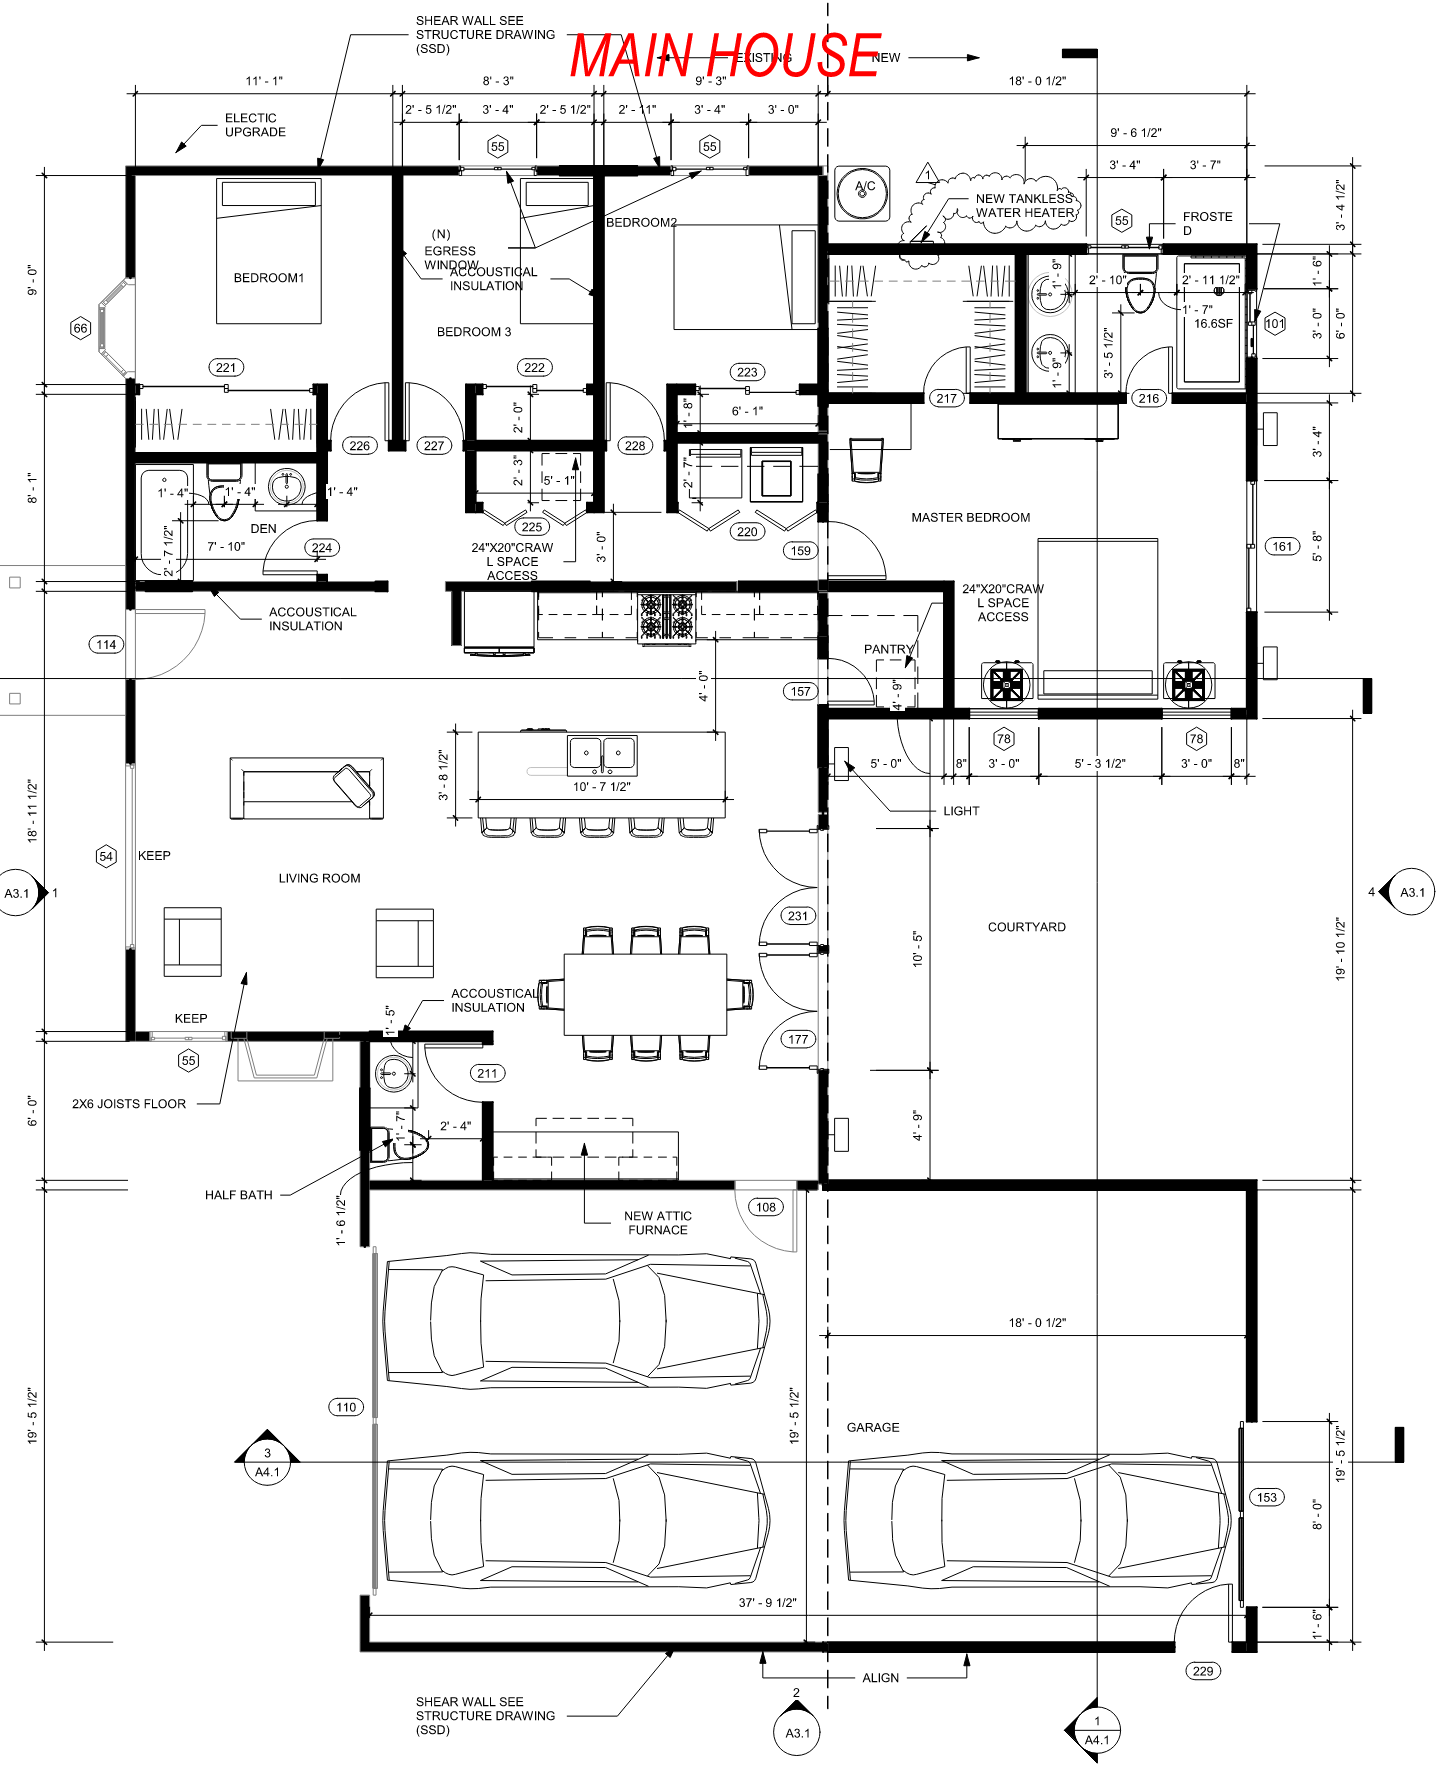 HOUSE plan clean2.png